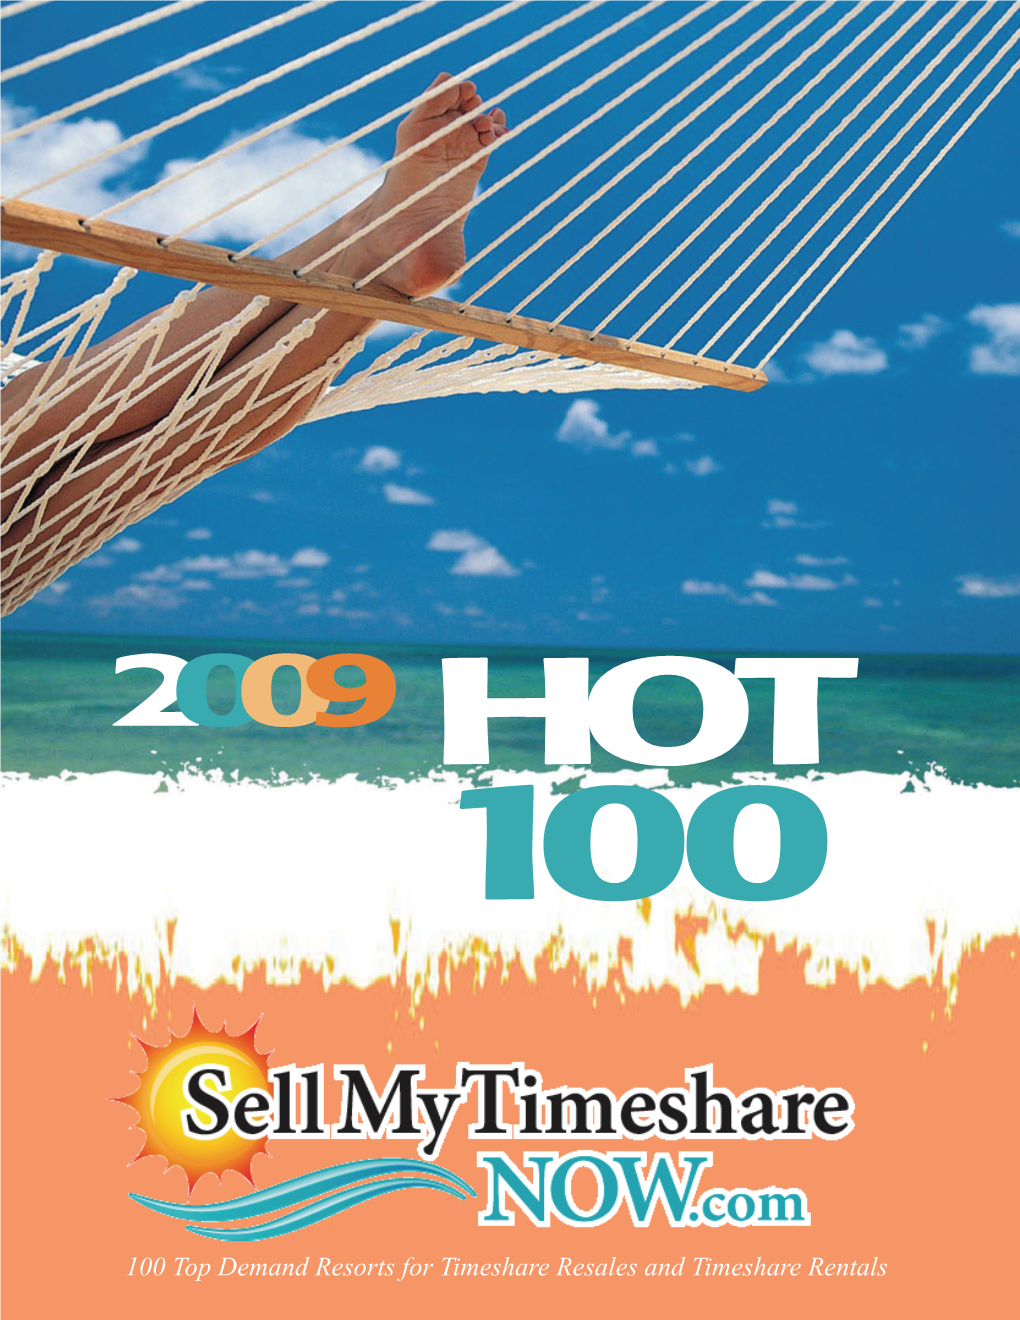 100 Top Demand Resorts for Timeshare Resales and Timeshare